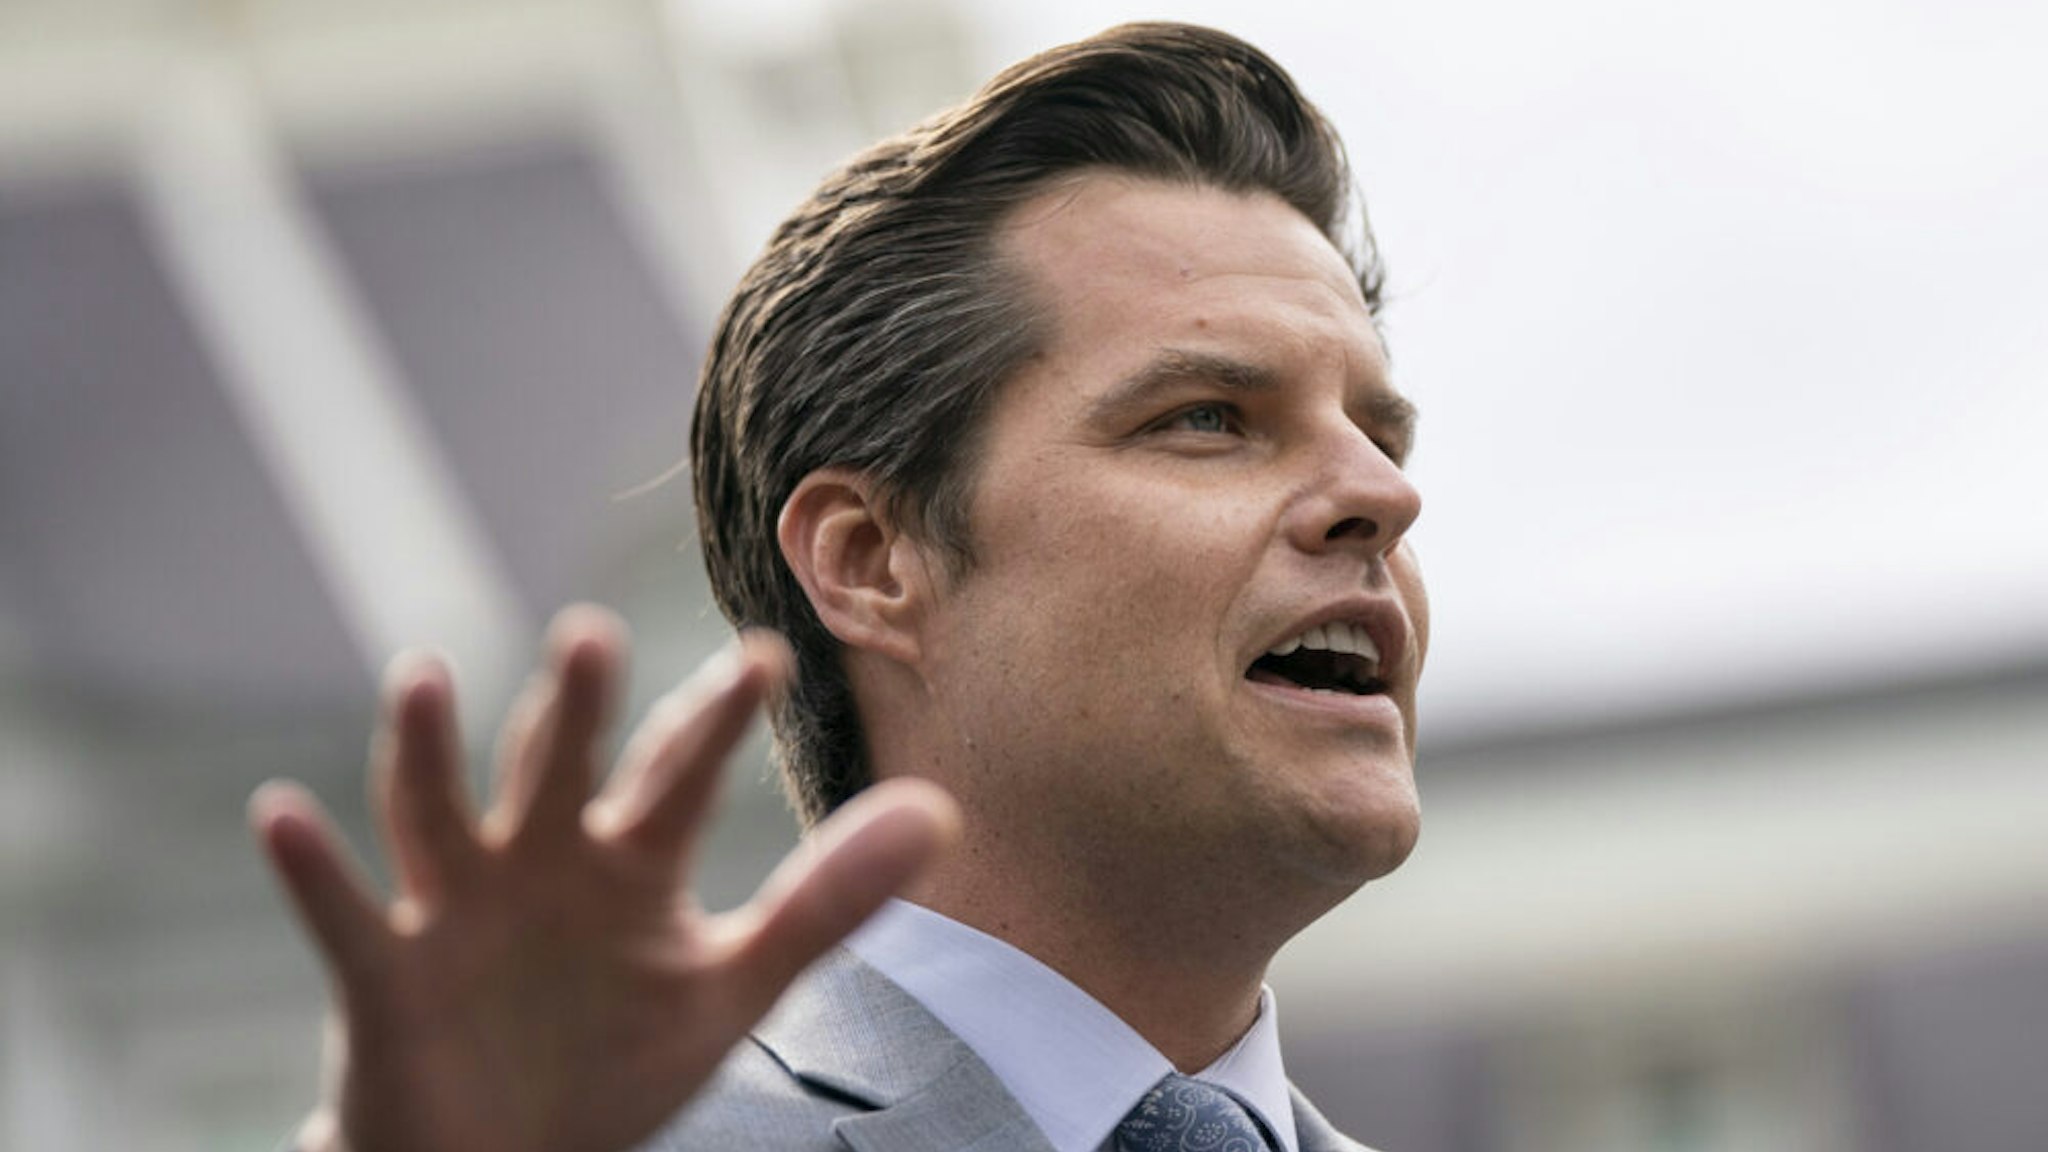 WASHINGTON, DC - APRIL 21: Rep. Matt Gaetz (R-FL) speaks to reporters outside the West Wing of the White House following a meeting with U.S. President Donald Trump on April 21, 2020 in Washington, DC. The president met with lawmakers about the $482 billion aid package that would replenish a small-business loan program and provide funding for hospitals facing financial shortfalls due to COVID-19.